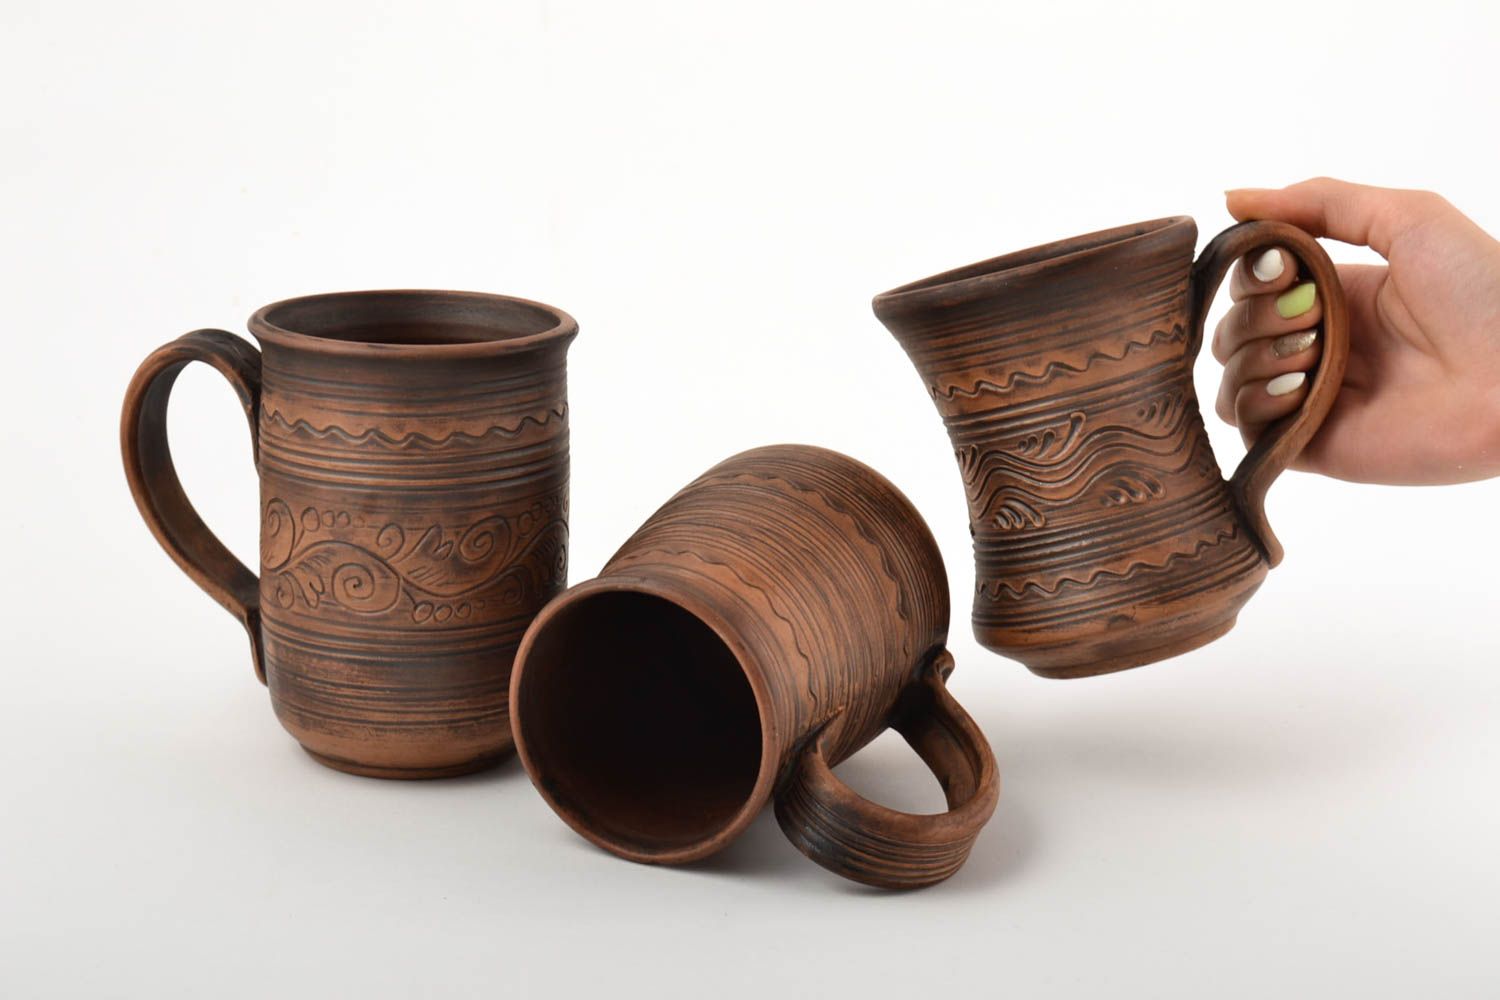 Clay 3 three XXXL cups' set, 16 oz, 18 oz, 20 oz with handle and rustic pattern photo 4